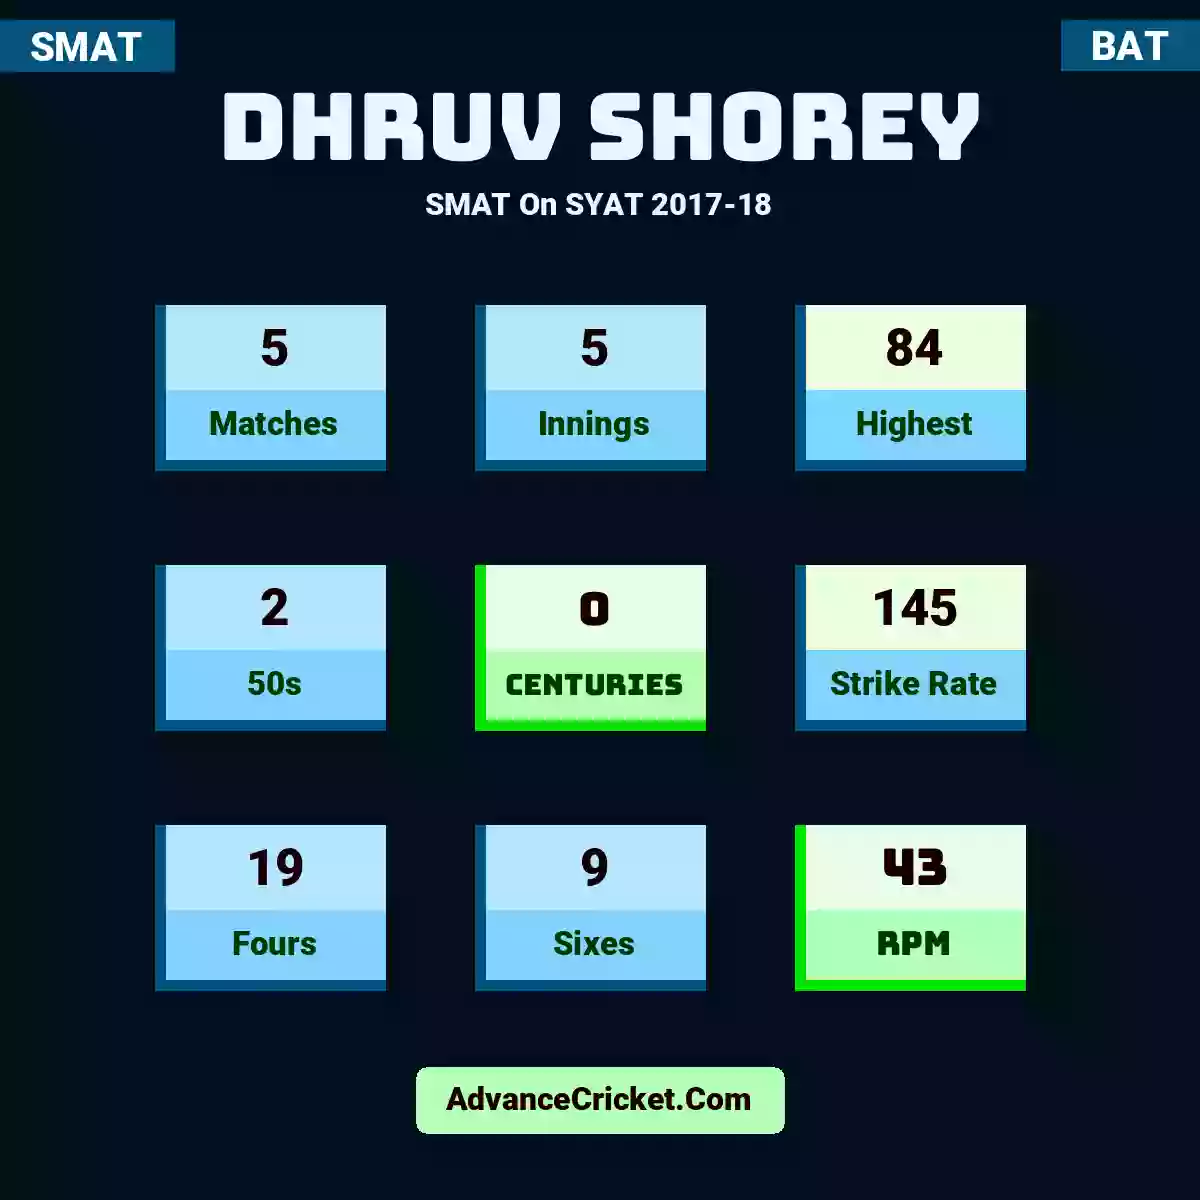 Dhruv Shorey SMAT  On SYAT 2017-18, Dhruv Shorey played 5 matches, scored 84 runs as highest, 2 half-centuries, and 0 centuries, with a strike rate of 145. D.Shorey hit 19 fours and 9 sixes, with an RPM of 43.